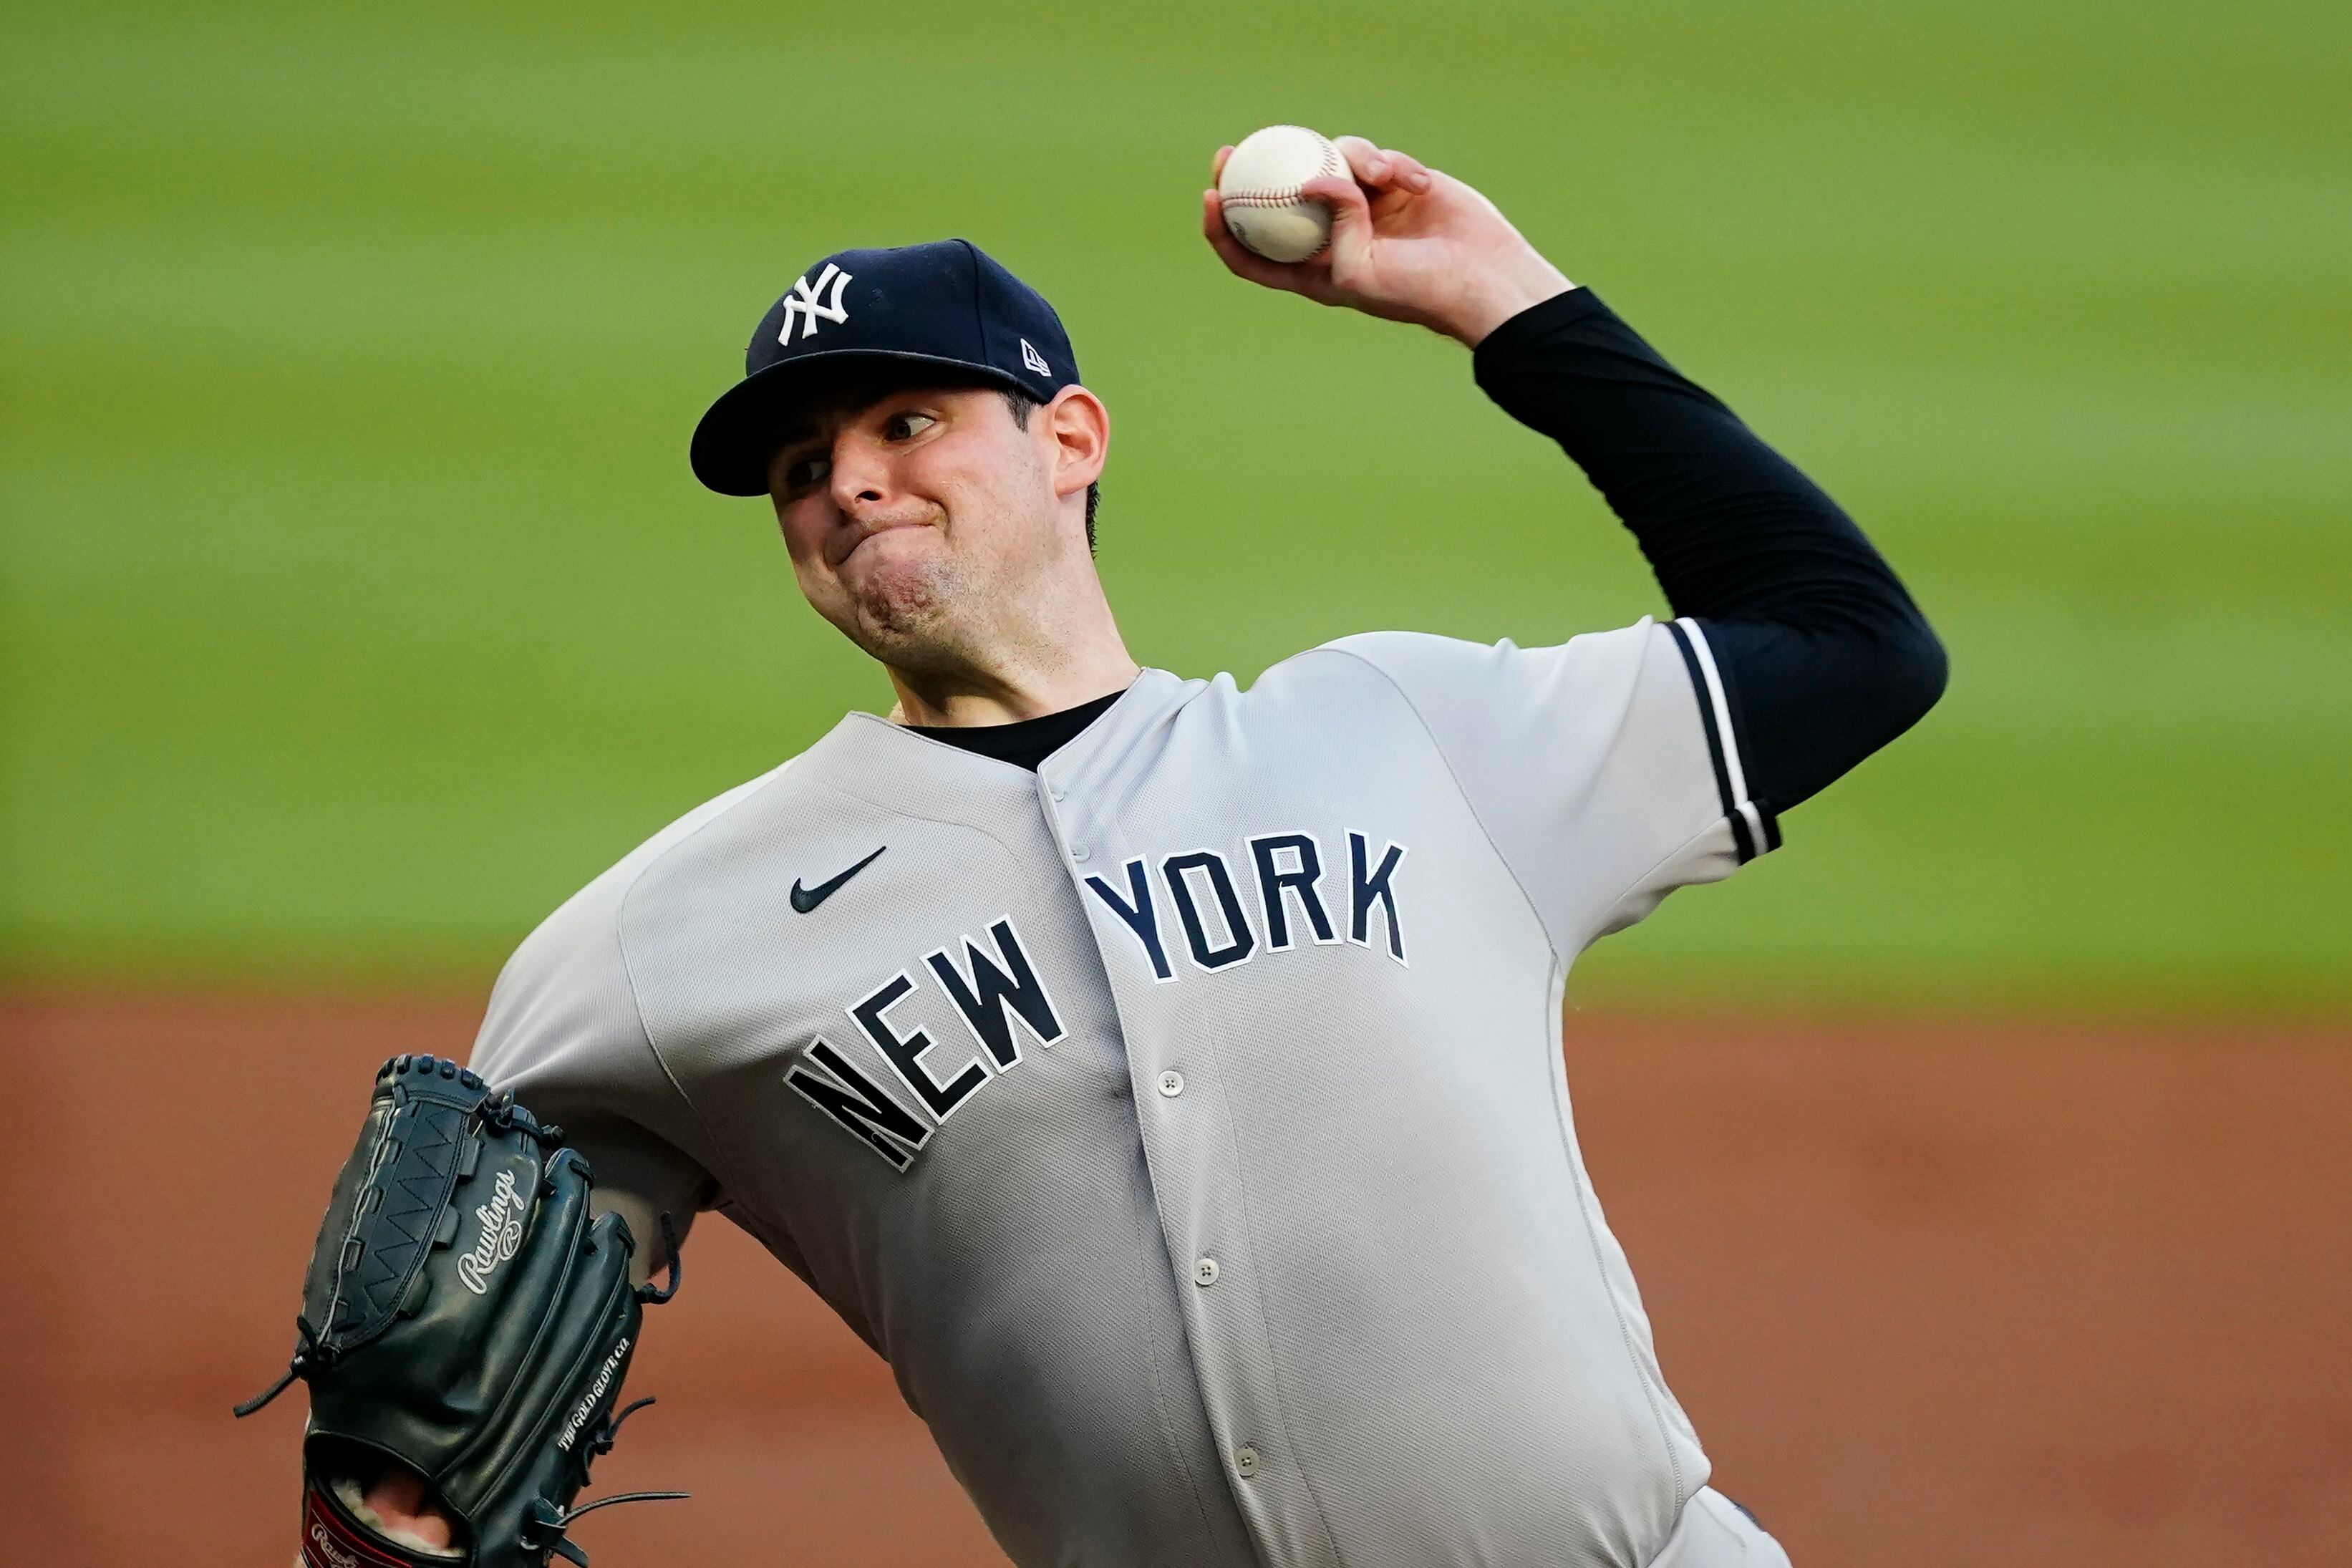 Yankees Pitcher Zack Britton Plays in 'Field of Dreams' Shoes That